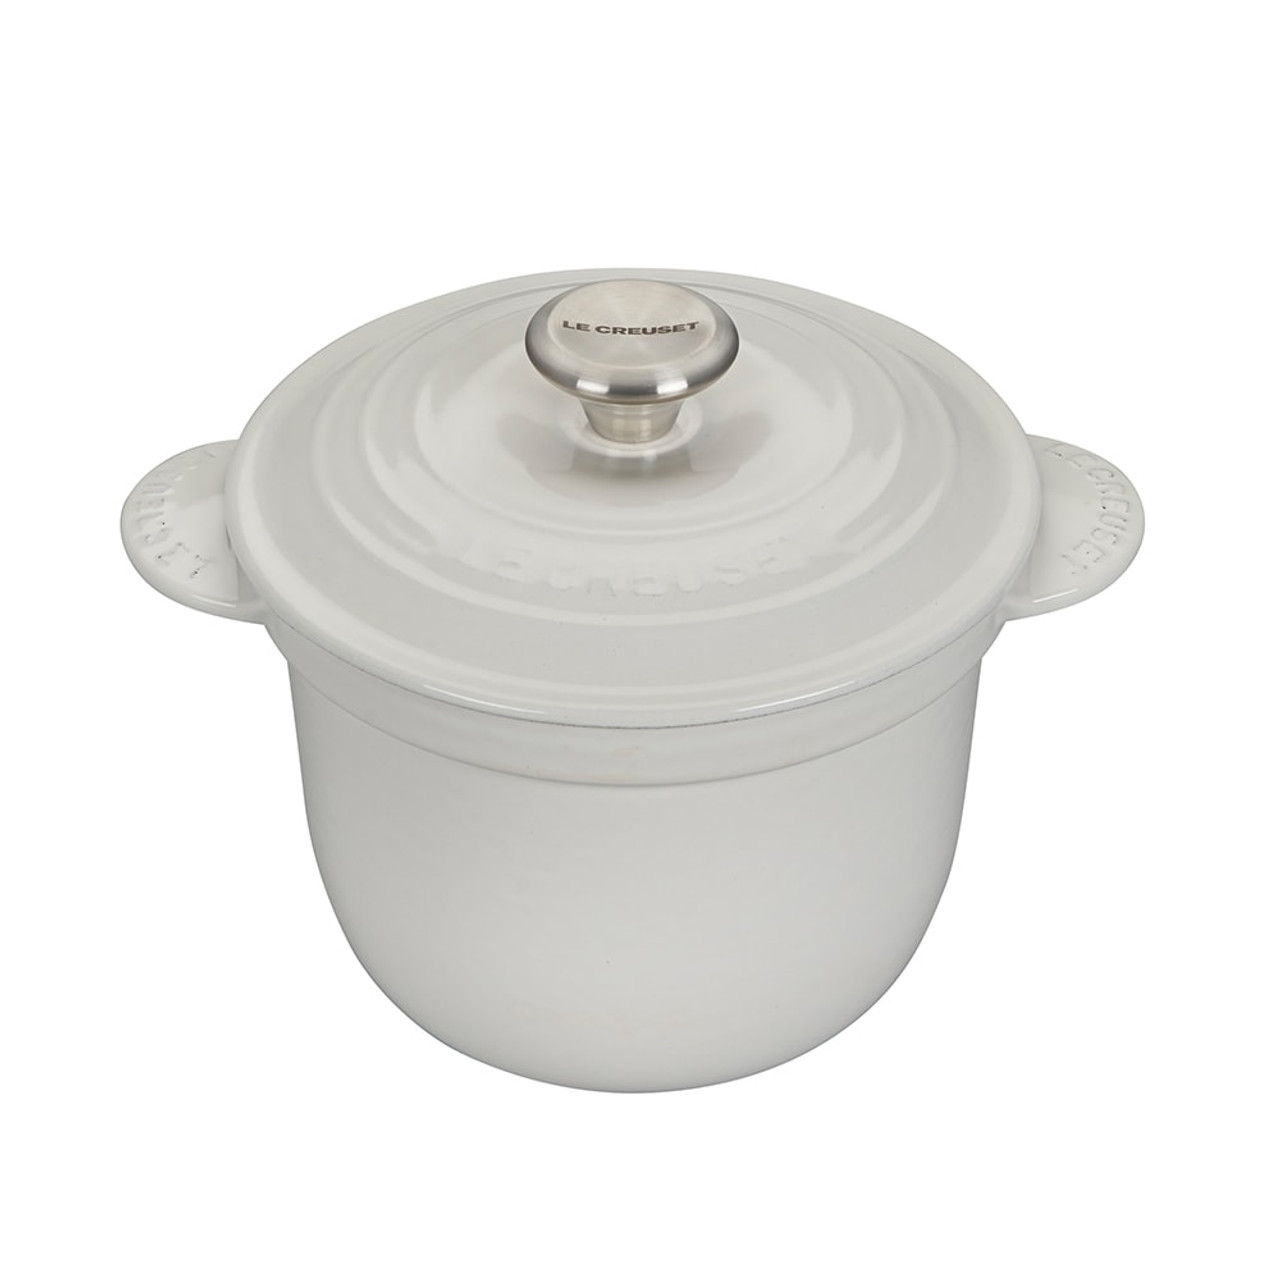 https://cdn11.bigcommerce.com/s-hccytny0od/images/stencil/1280x1280/products/3011/10721/le-creuset-rice-pot-white__84075.1588013737.jpg?c=2?imbypass=on